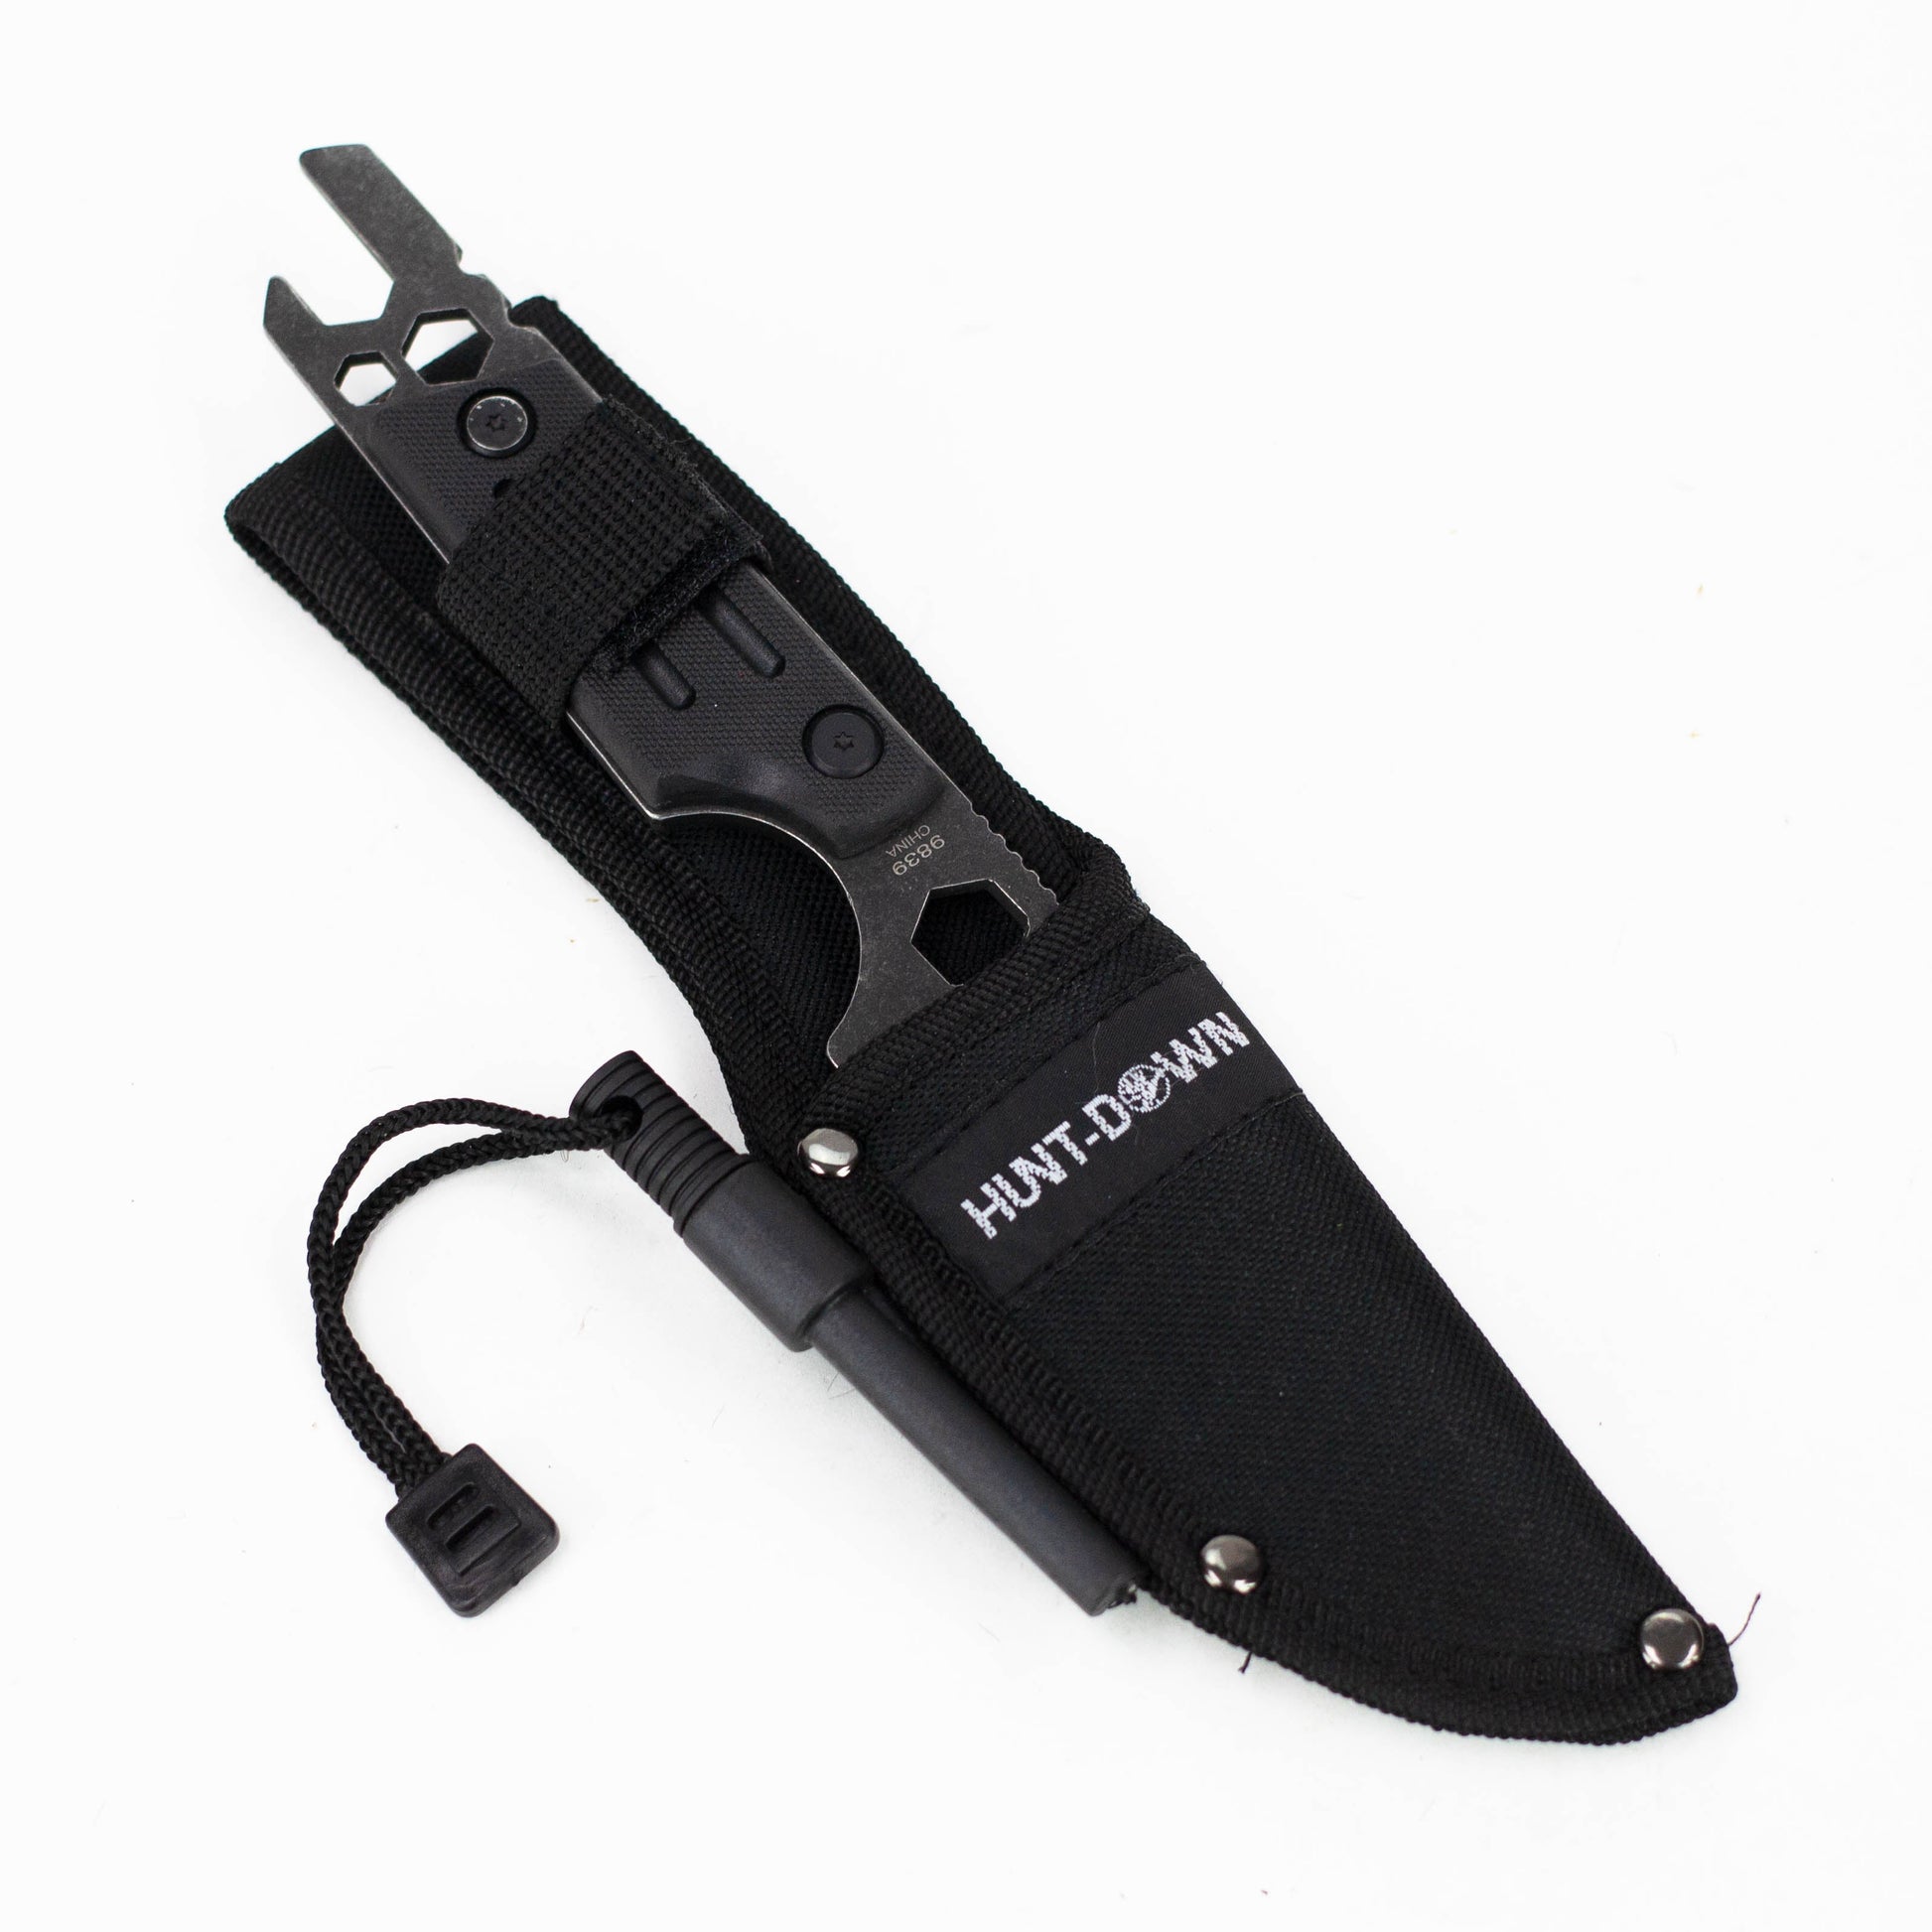 Hunt-Down | 9.5" Stonewashed Fixed Blade Full Tang Tactical Knife Sheath & Wrench [9839]_1